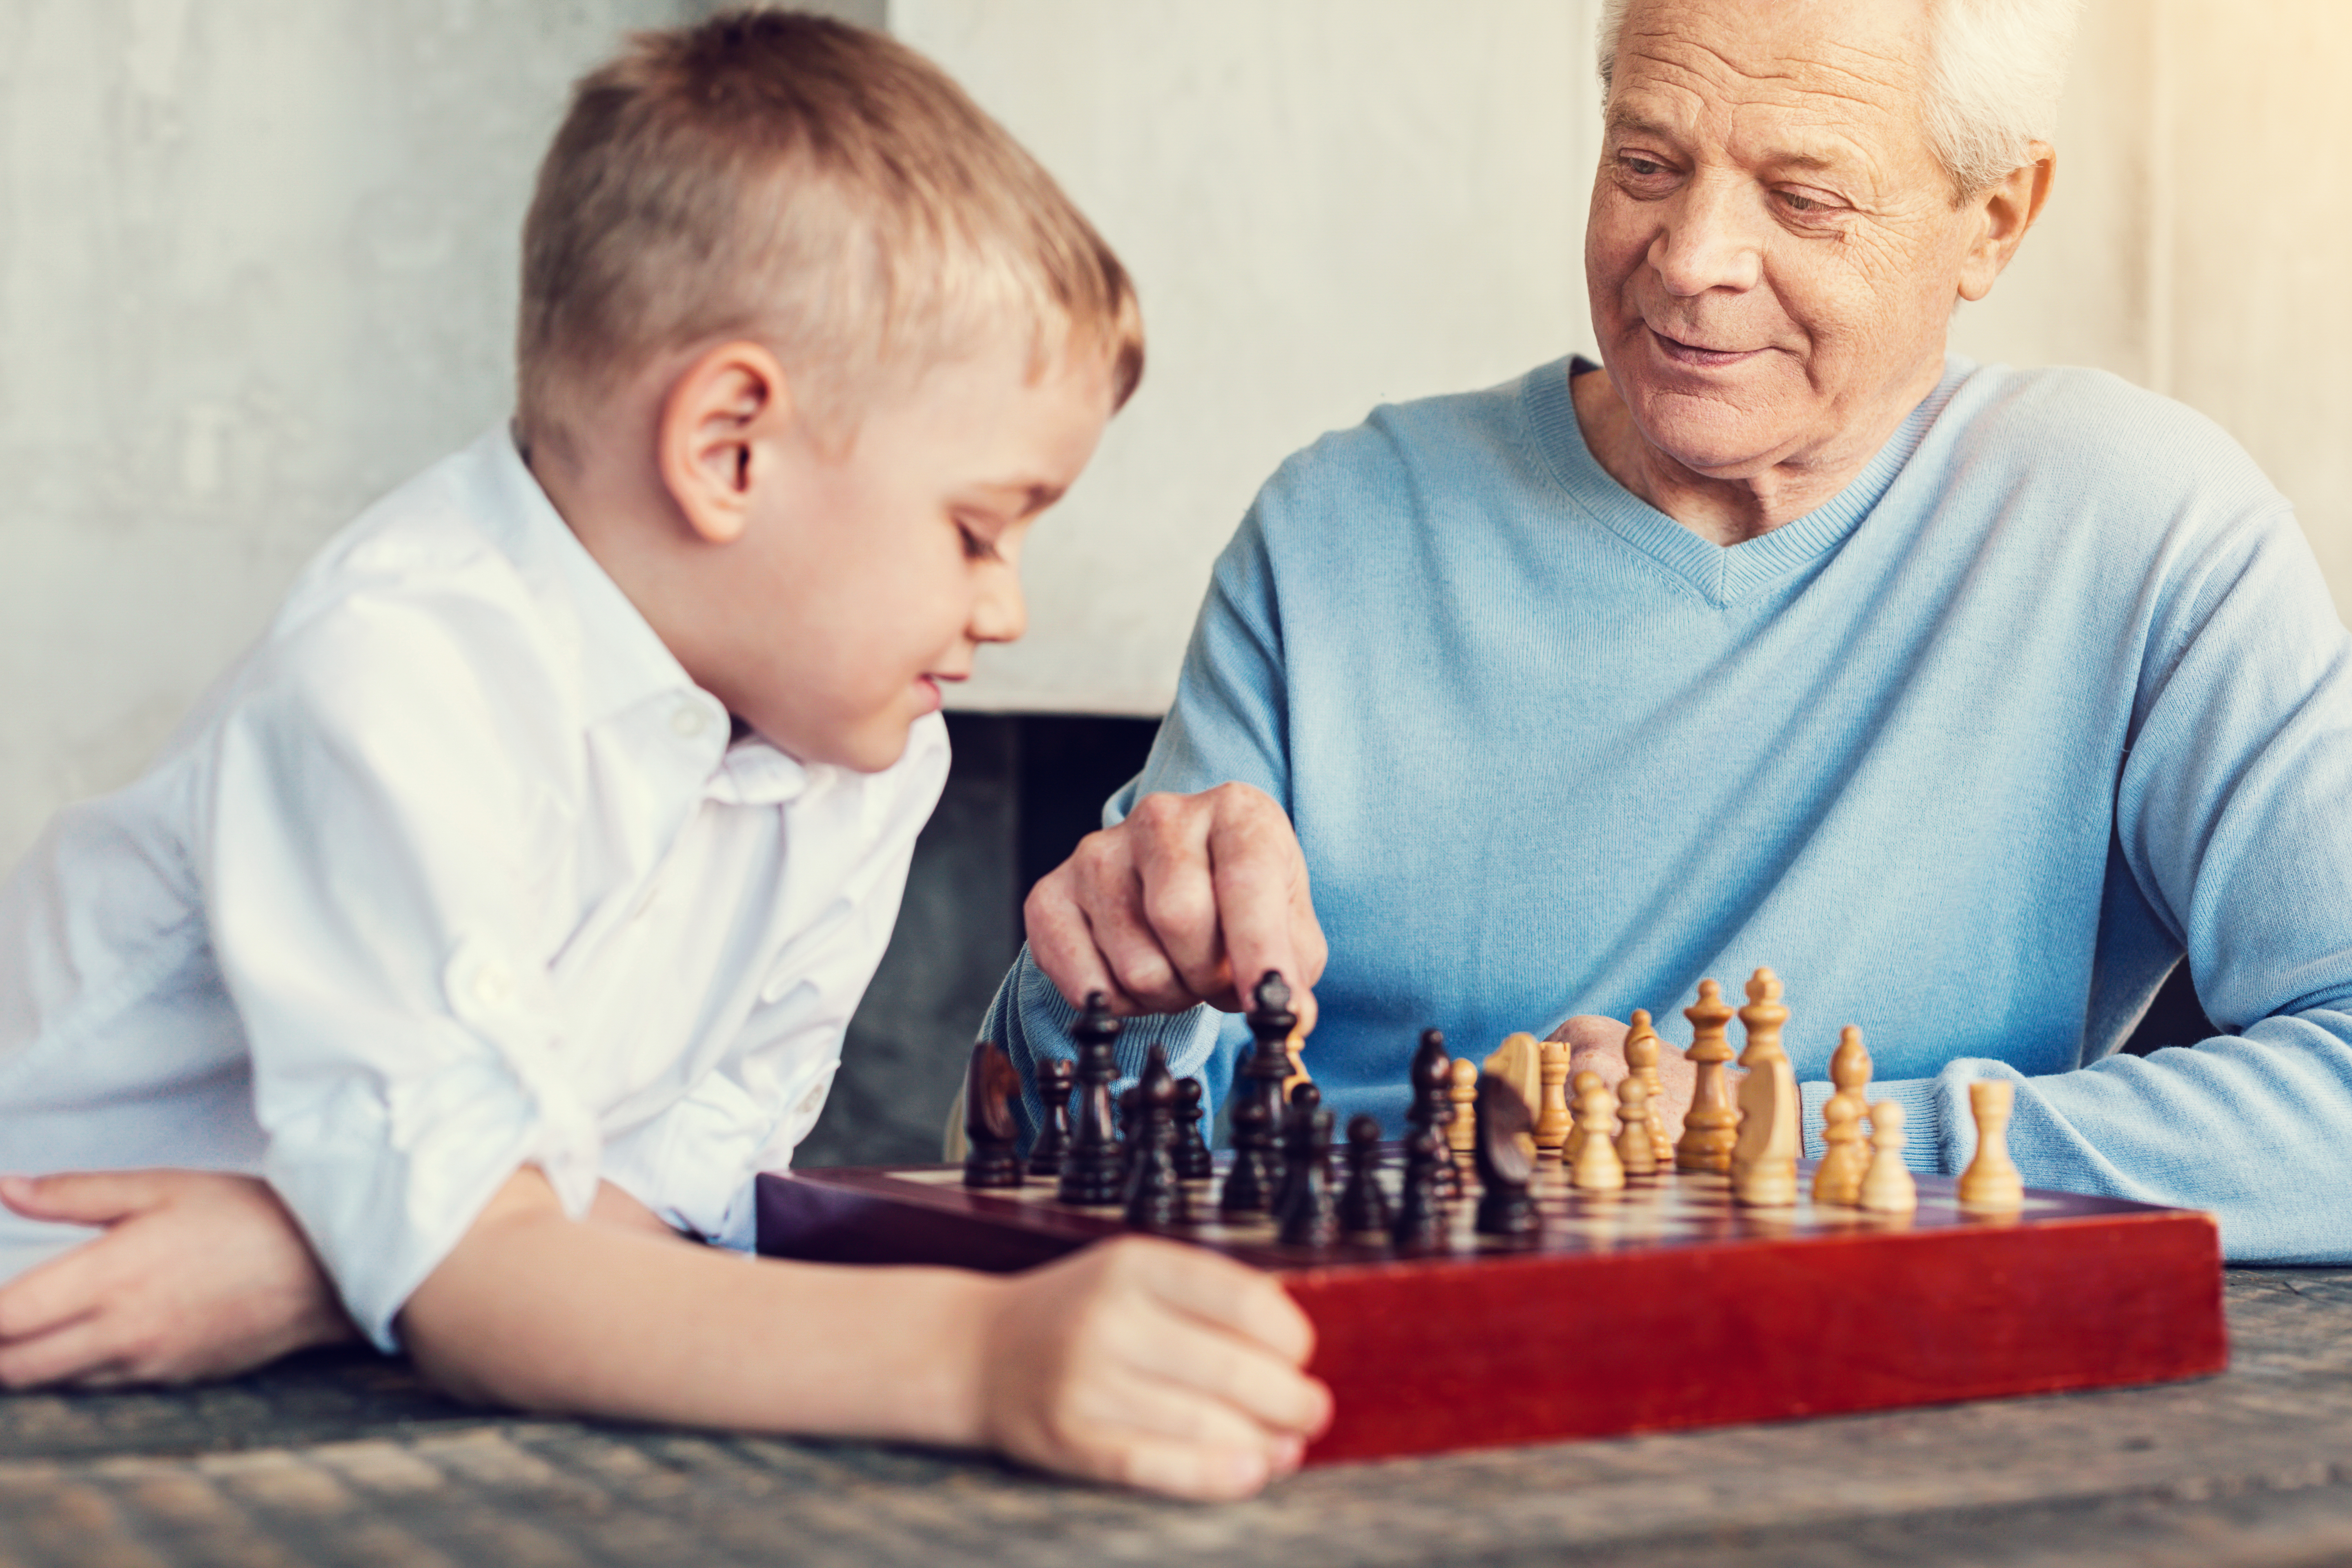 A young boy and an elderly man are enjoying a game of chess together